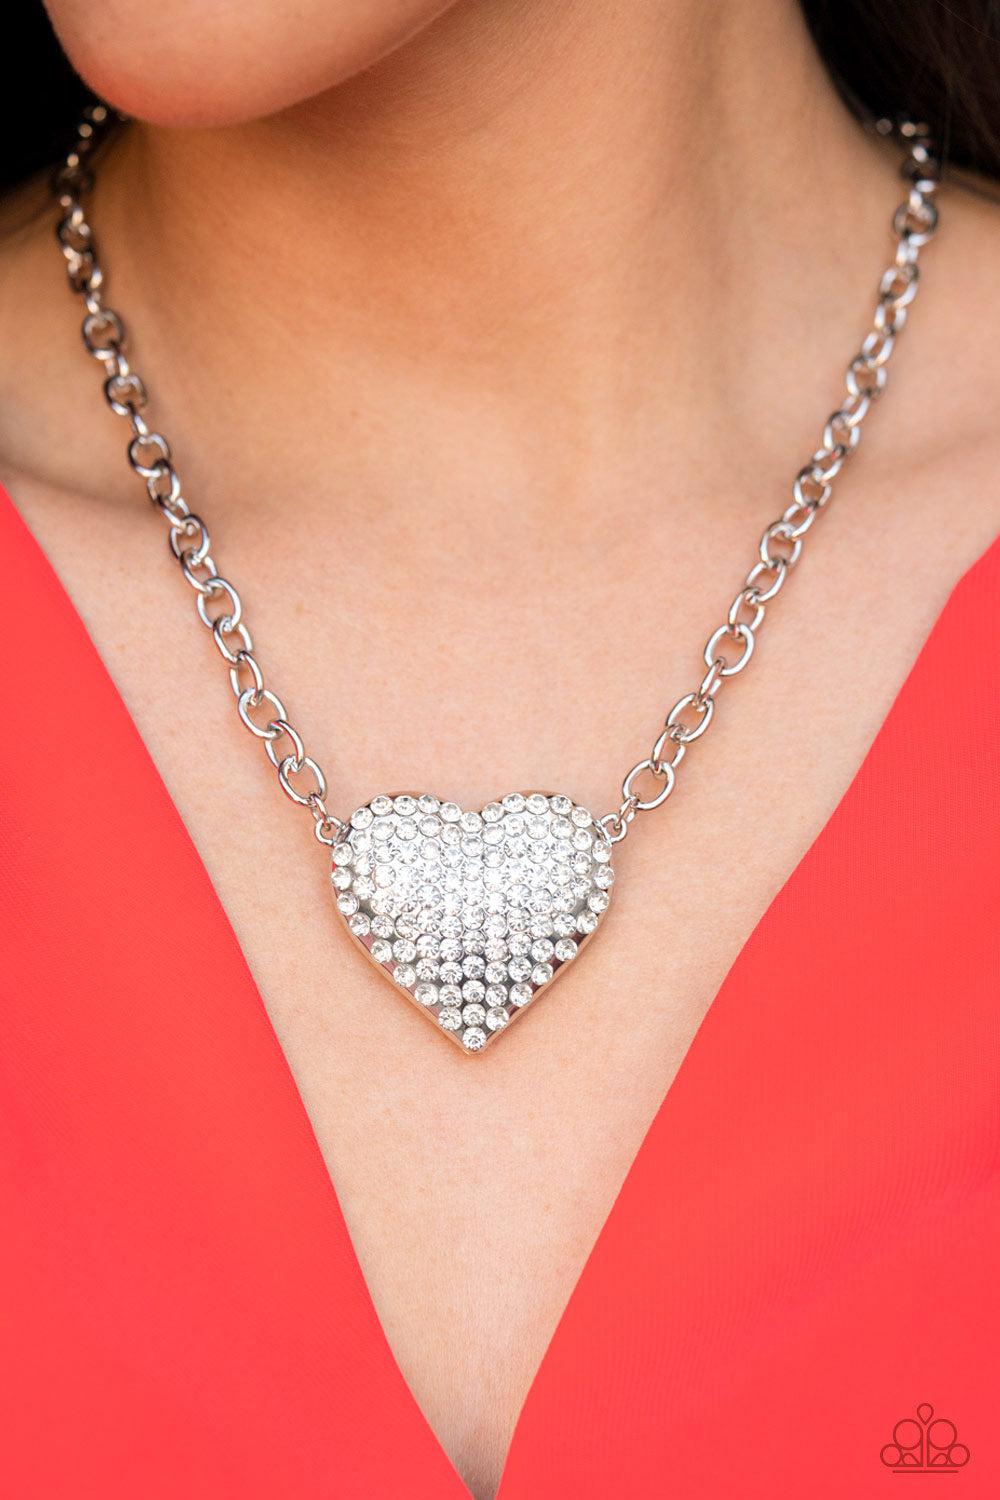 Heartbreakingly Blingy White Rhinestone Heart Necklace - Paparazzi Accessories- on model - CarasShop.com - $5 Jewelry by Cara Jewels